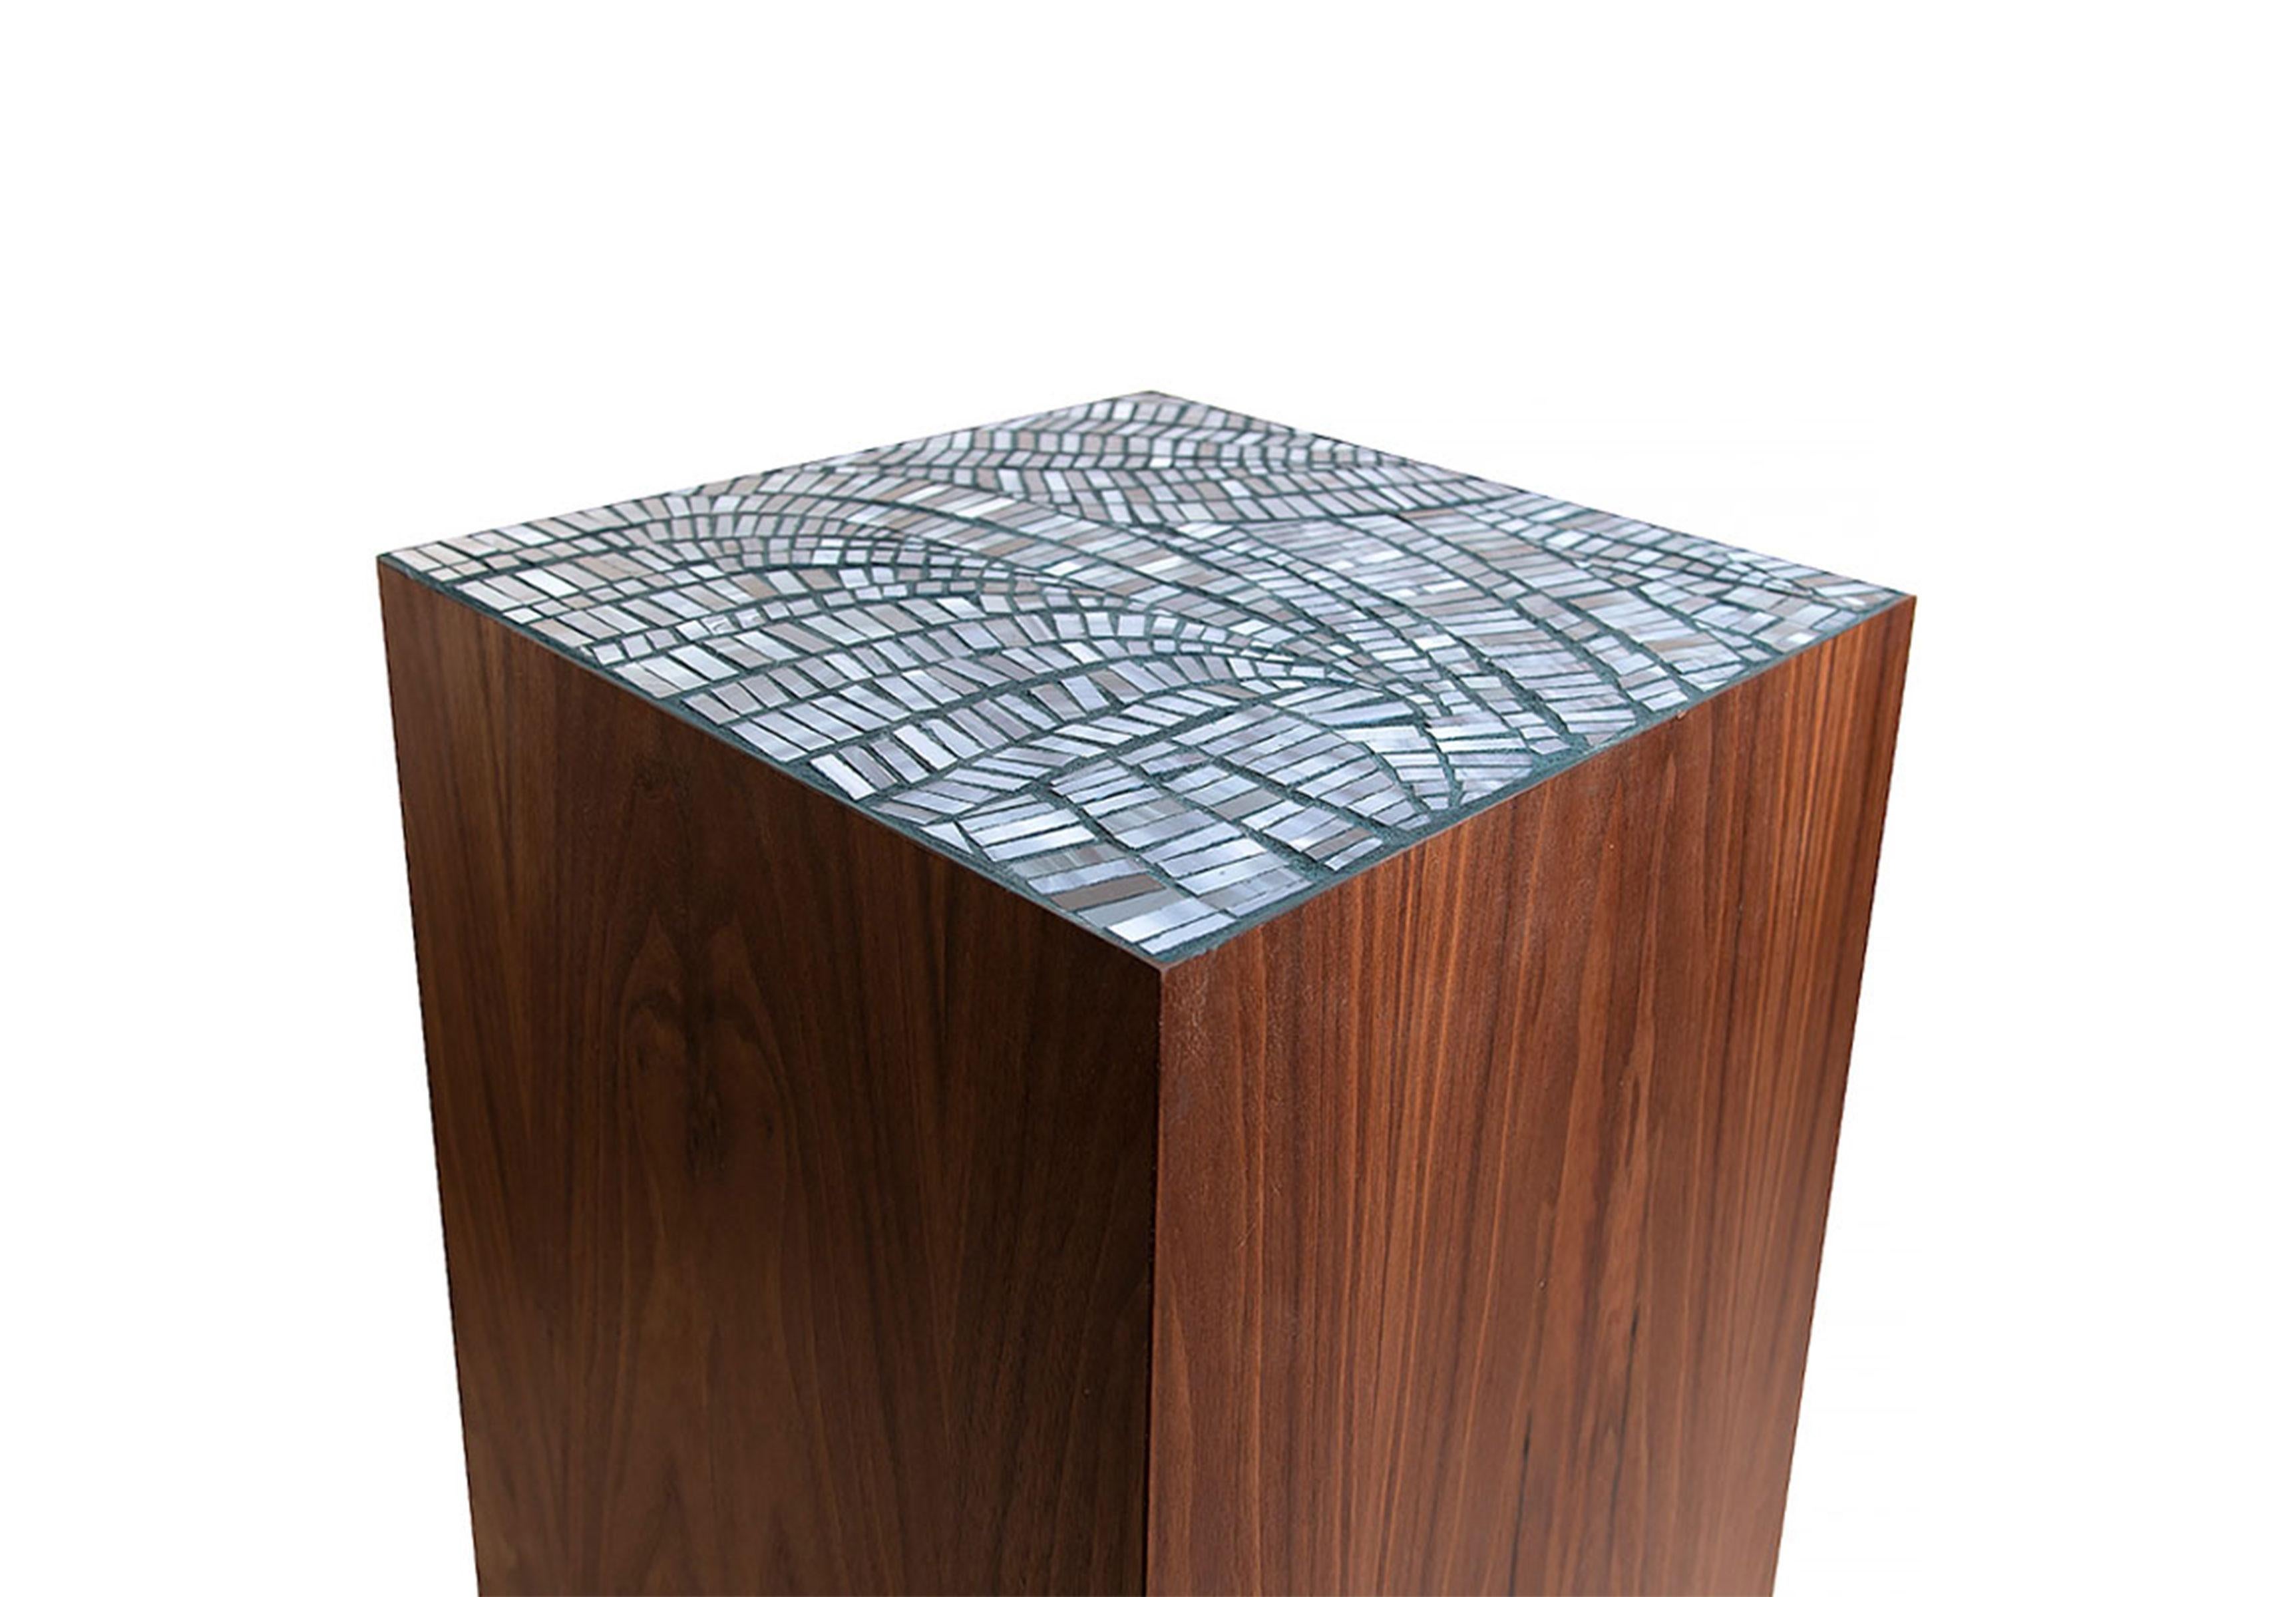 The Natura Pedestal by Ercole Home has a natural wood finish on Walnut. Handcut glass mosaics in Light Cloudy Notte glass mosaic decorate the top surface in Plume pattern. 
Custom sizes and finishes are available. 
Made in New York City.

#pedestal